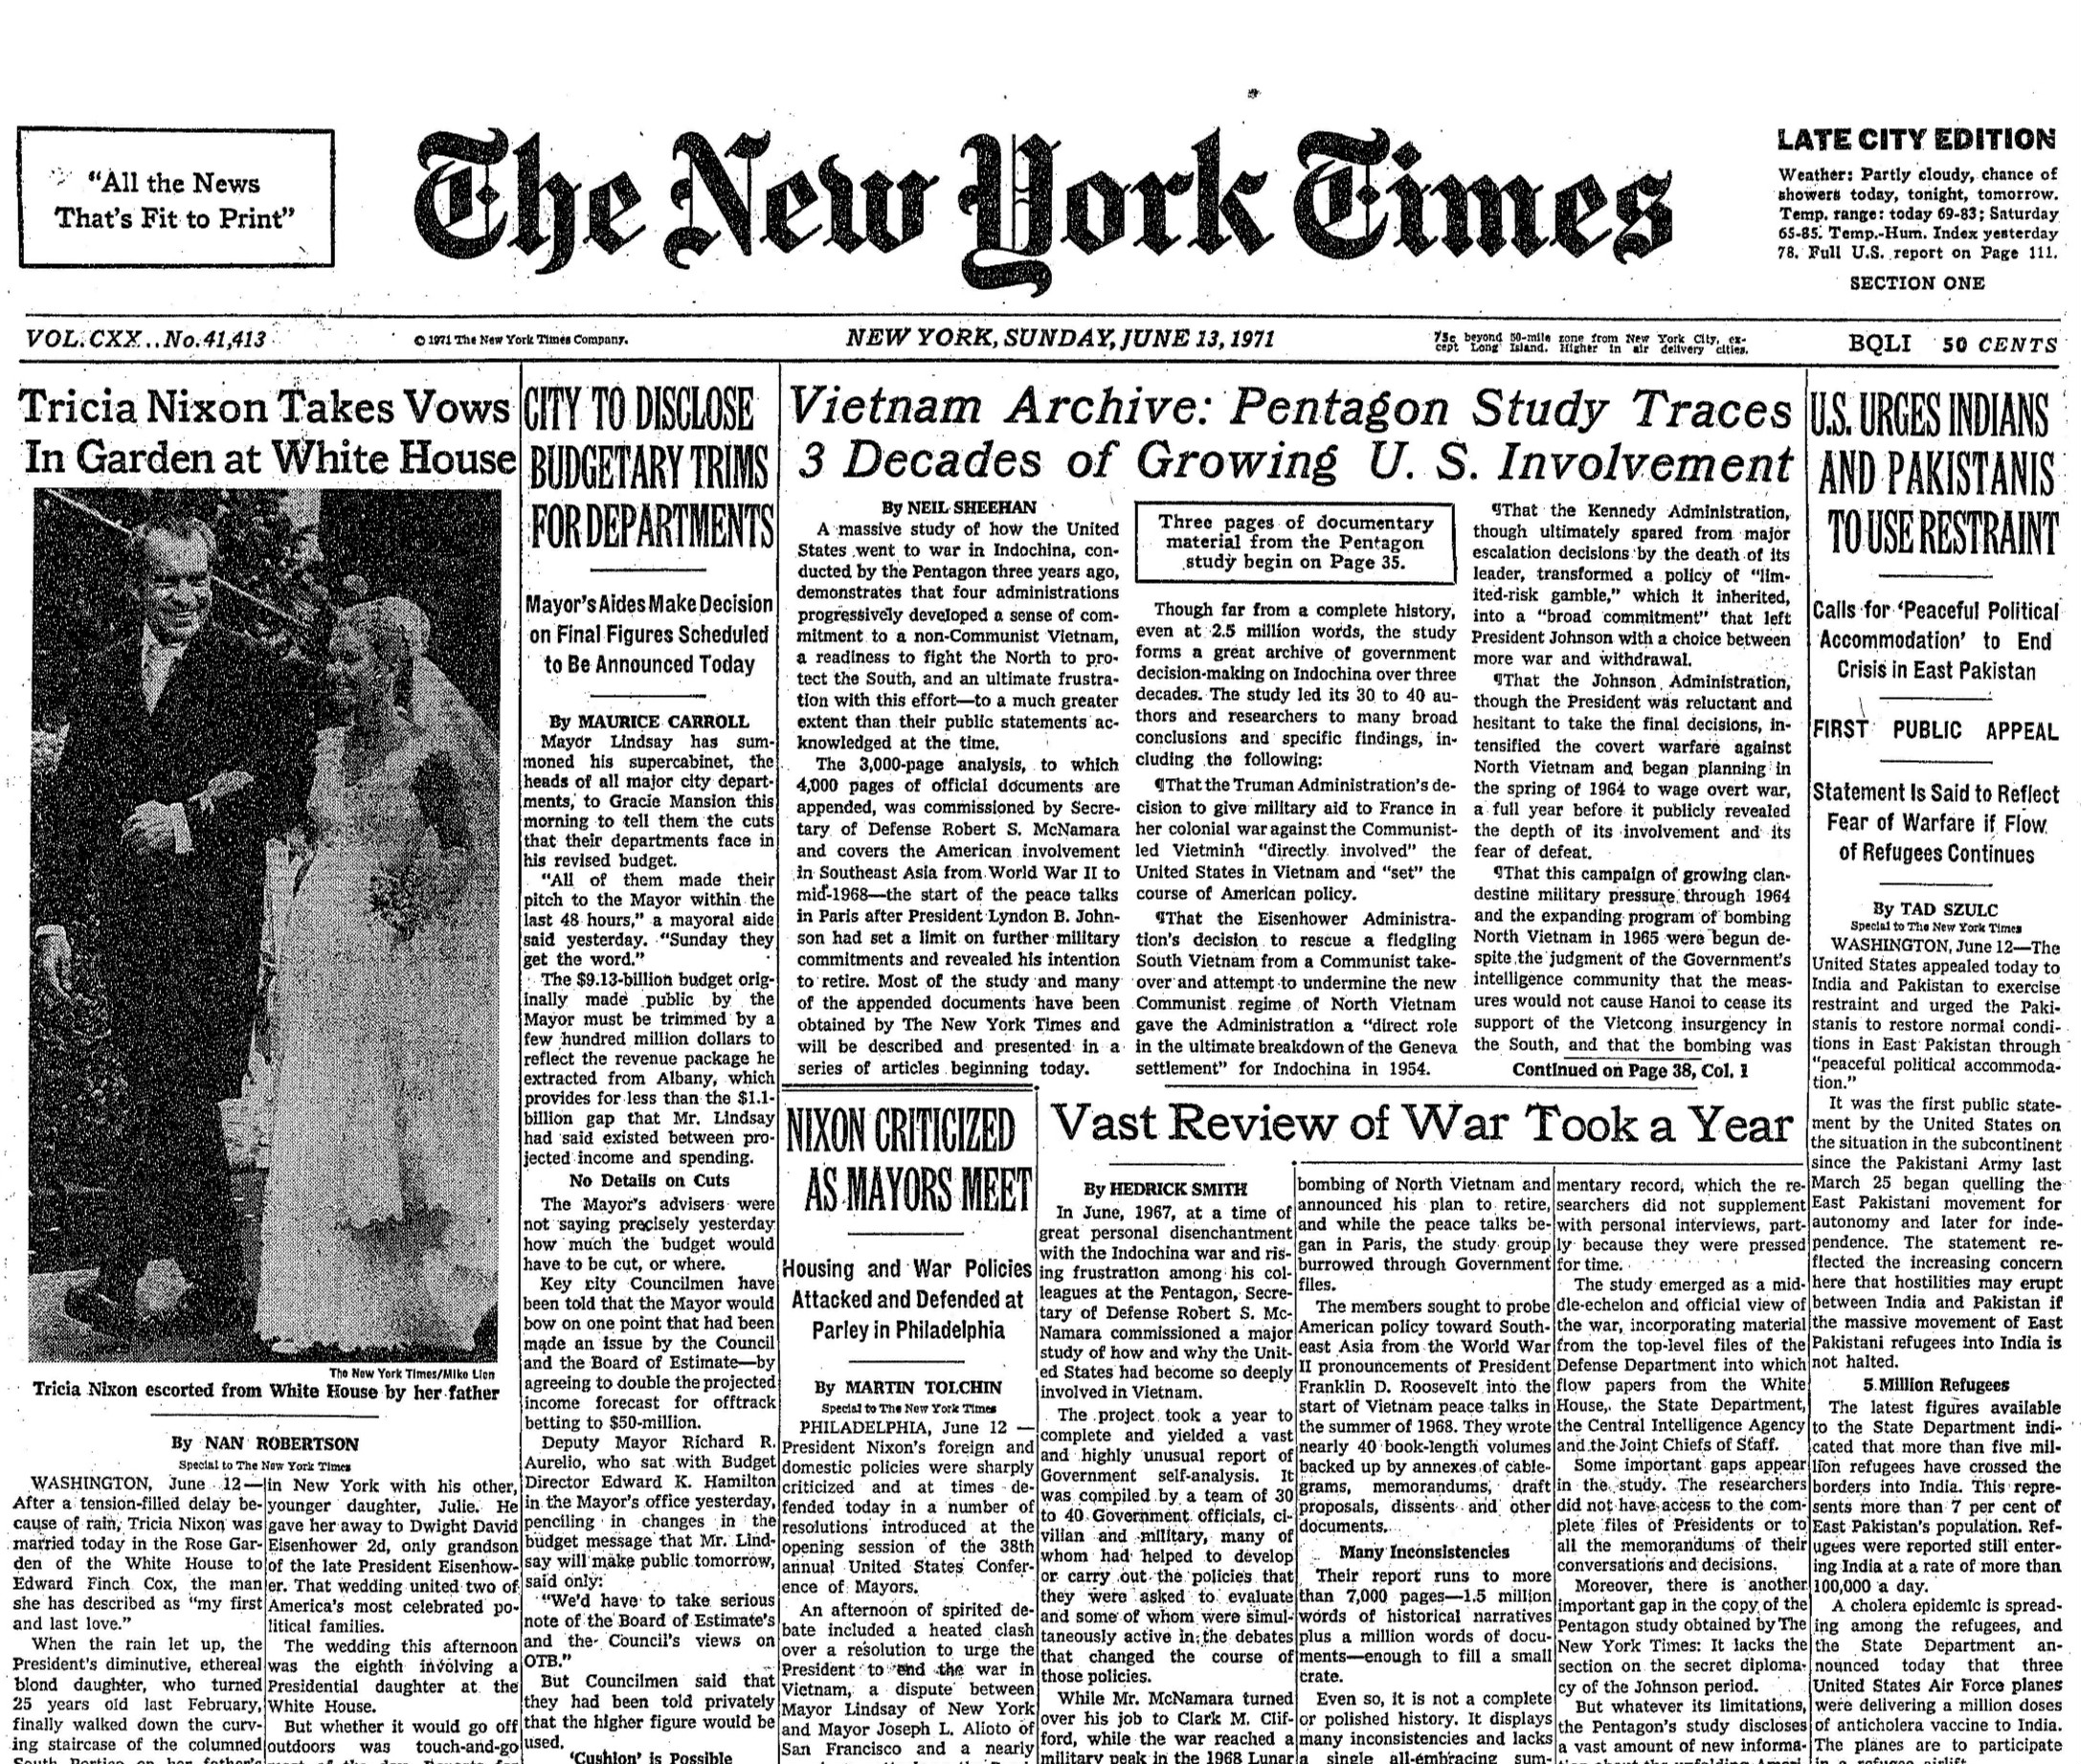 The New York Times The Pulitzer Prizes 